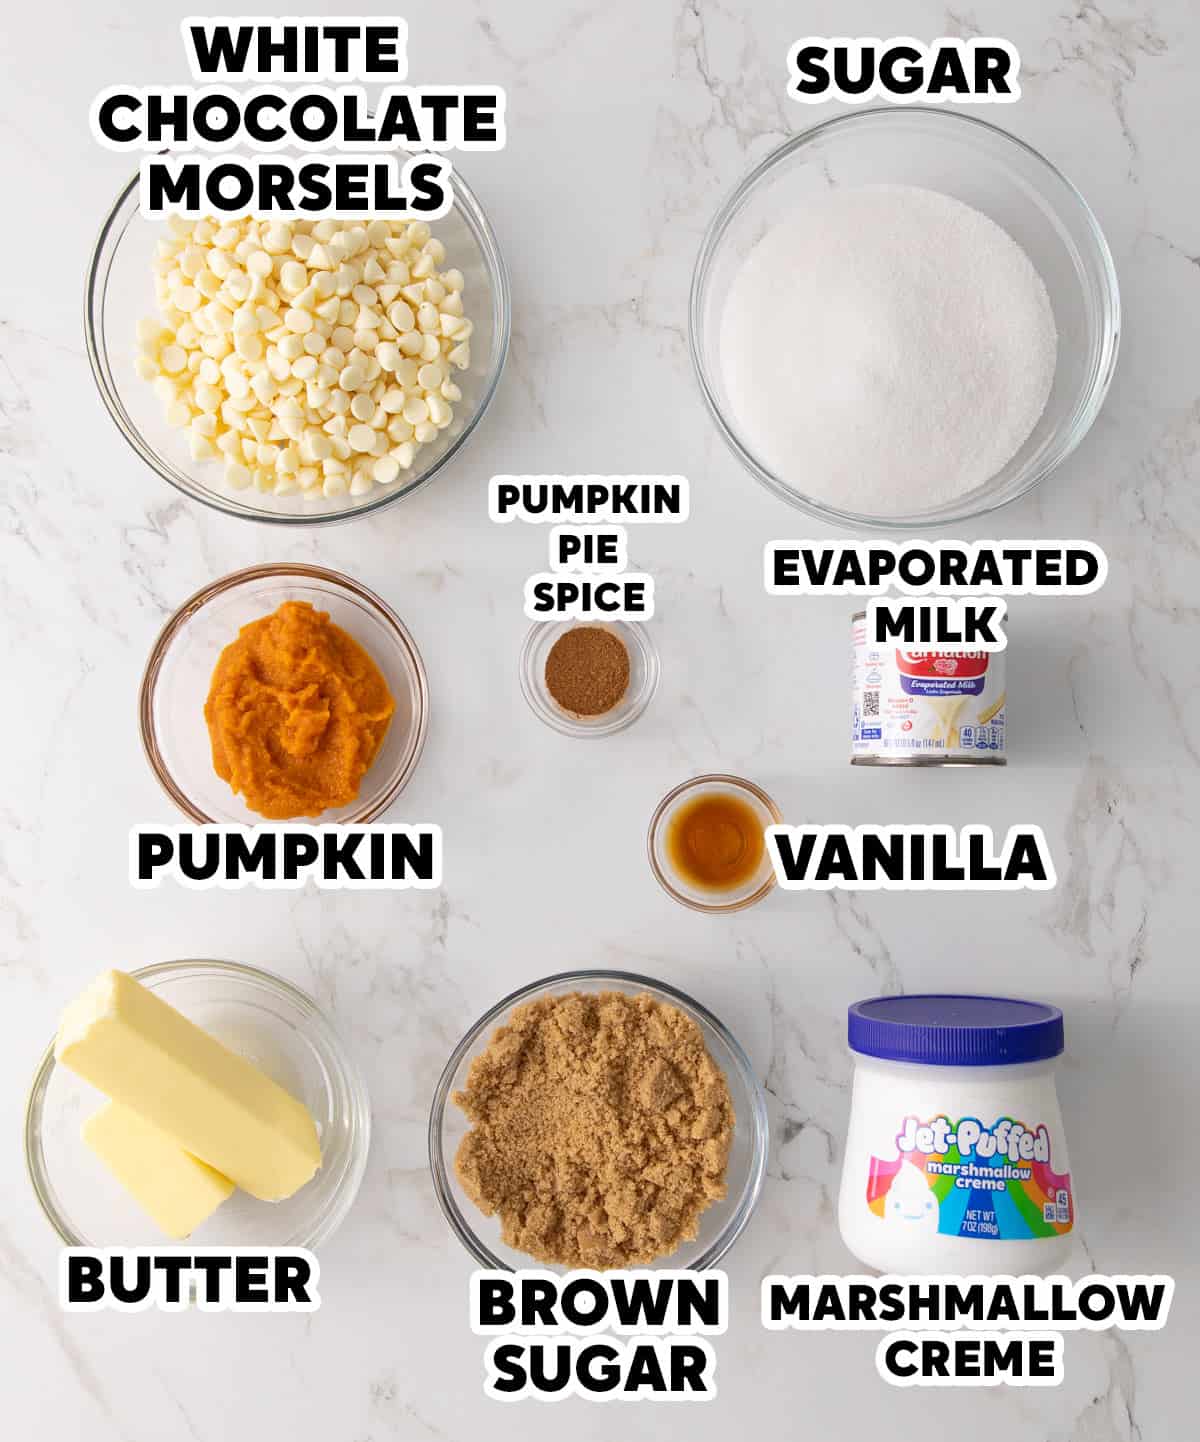 Overhead view of ingredients needed to make pumpkin fudge with overlay text.